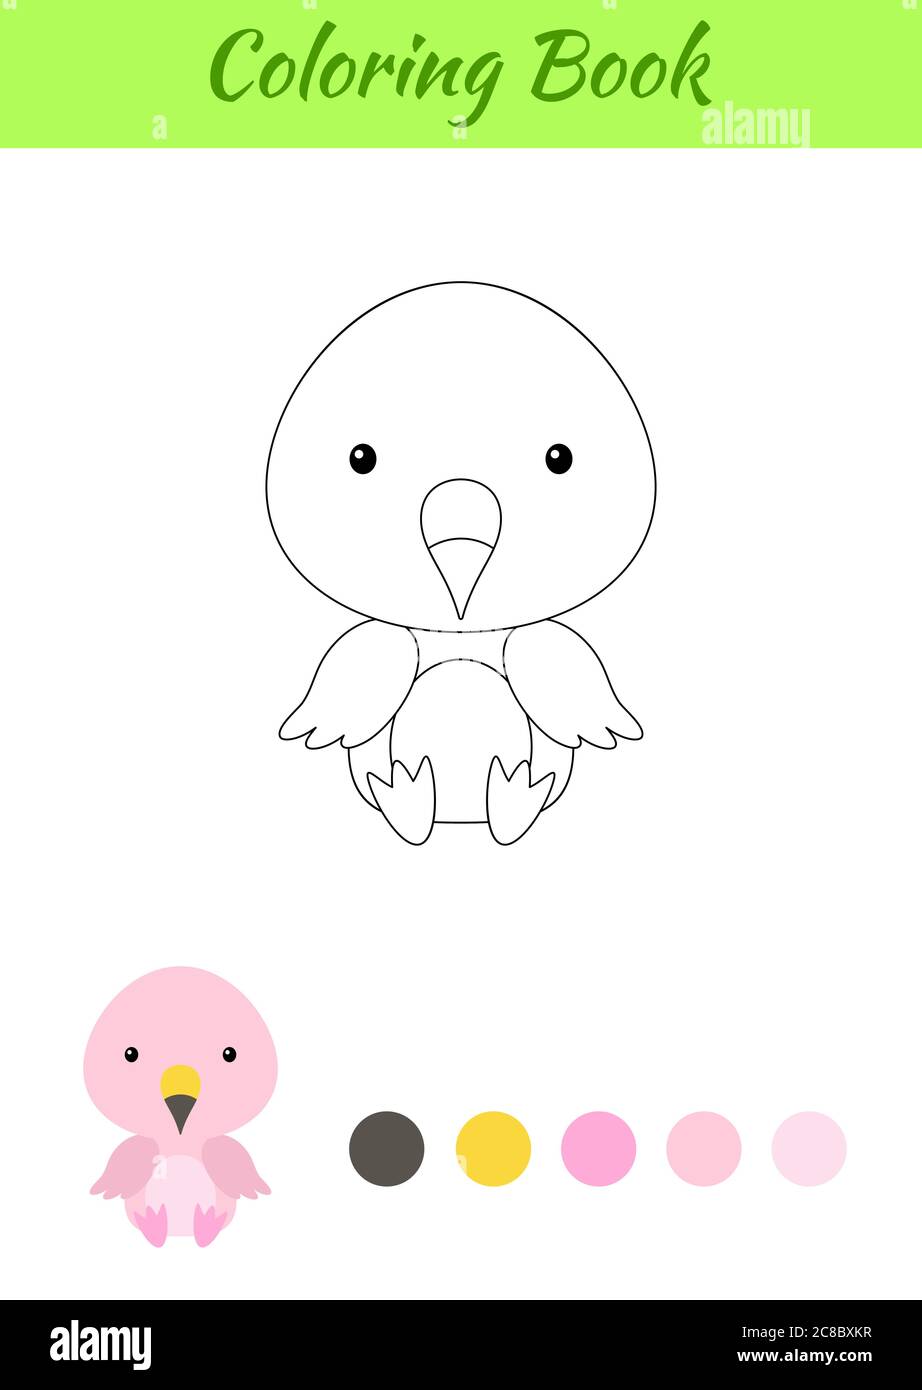 Download Coloring Page Little Sitting Baby Flamingo Coloring Book For Kids Educational Activity For Preschool Years Kids And Toddlers With Cute Animal Stock Vector Image Art Alamy